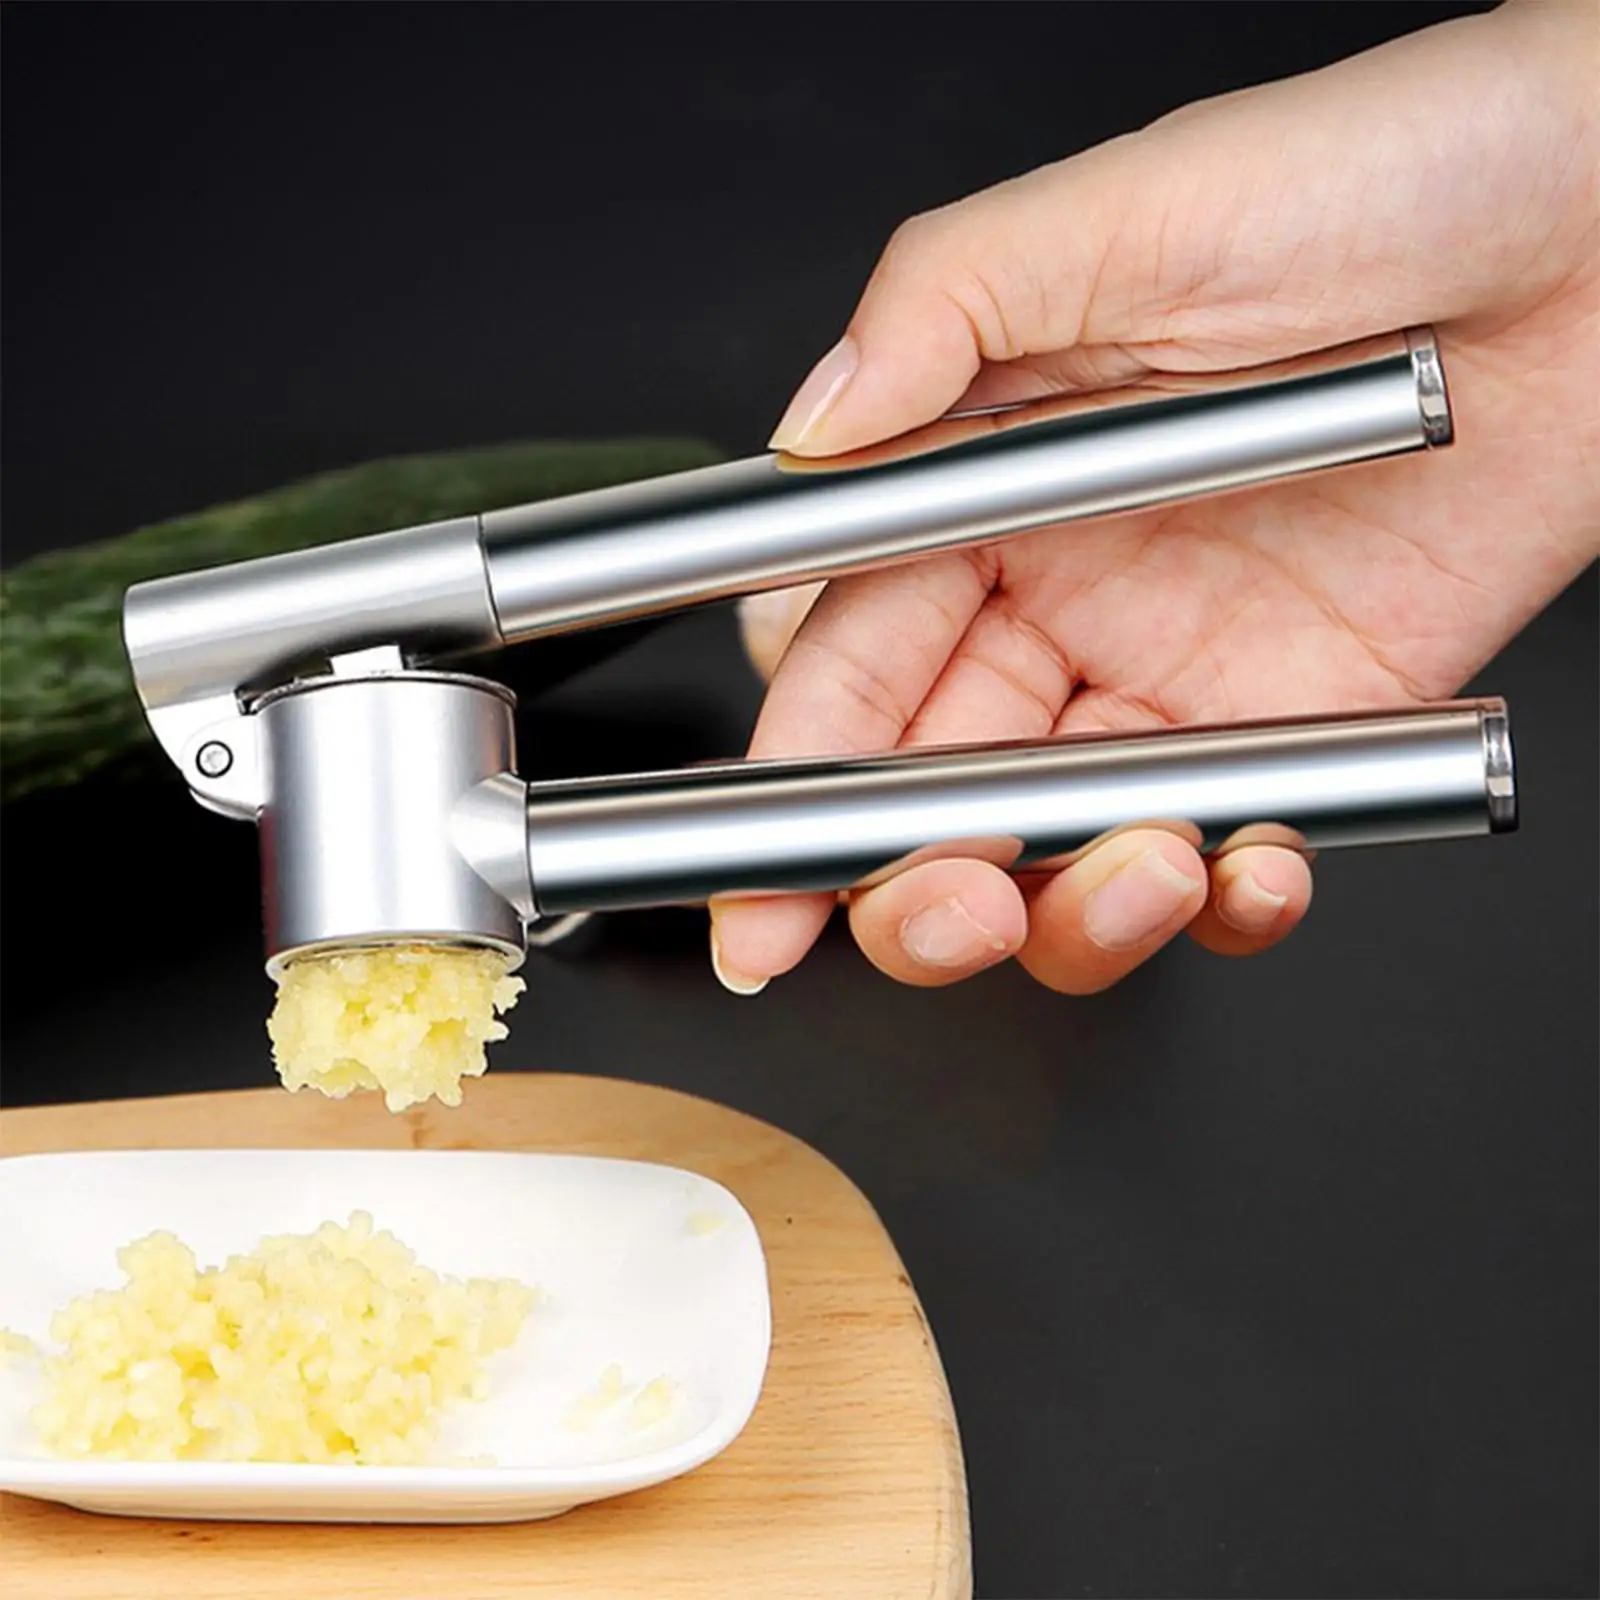 Stainless Steel Garlic Press Mincer Kitchen Tool Sturdy Ginger Mincer Squeezer Masher for Vegetables Nuts Fruits Ginger Carrots